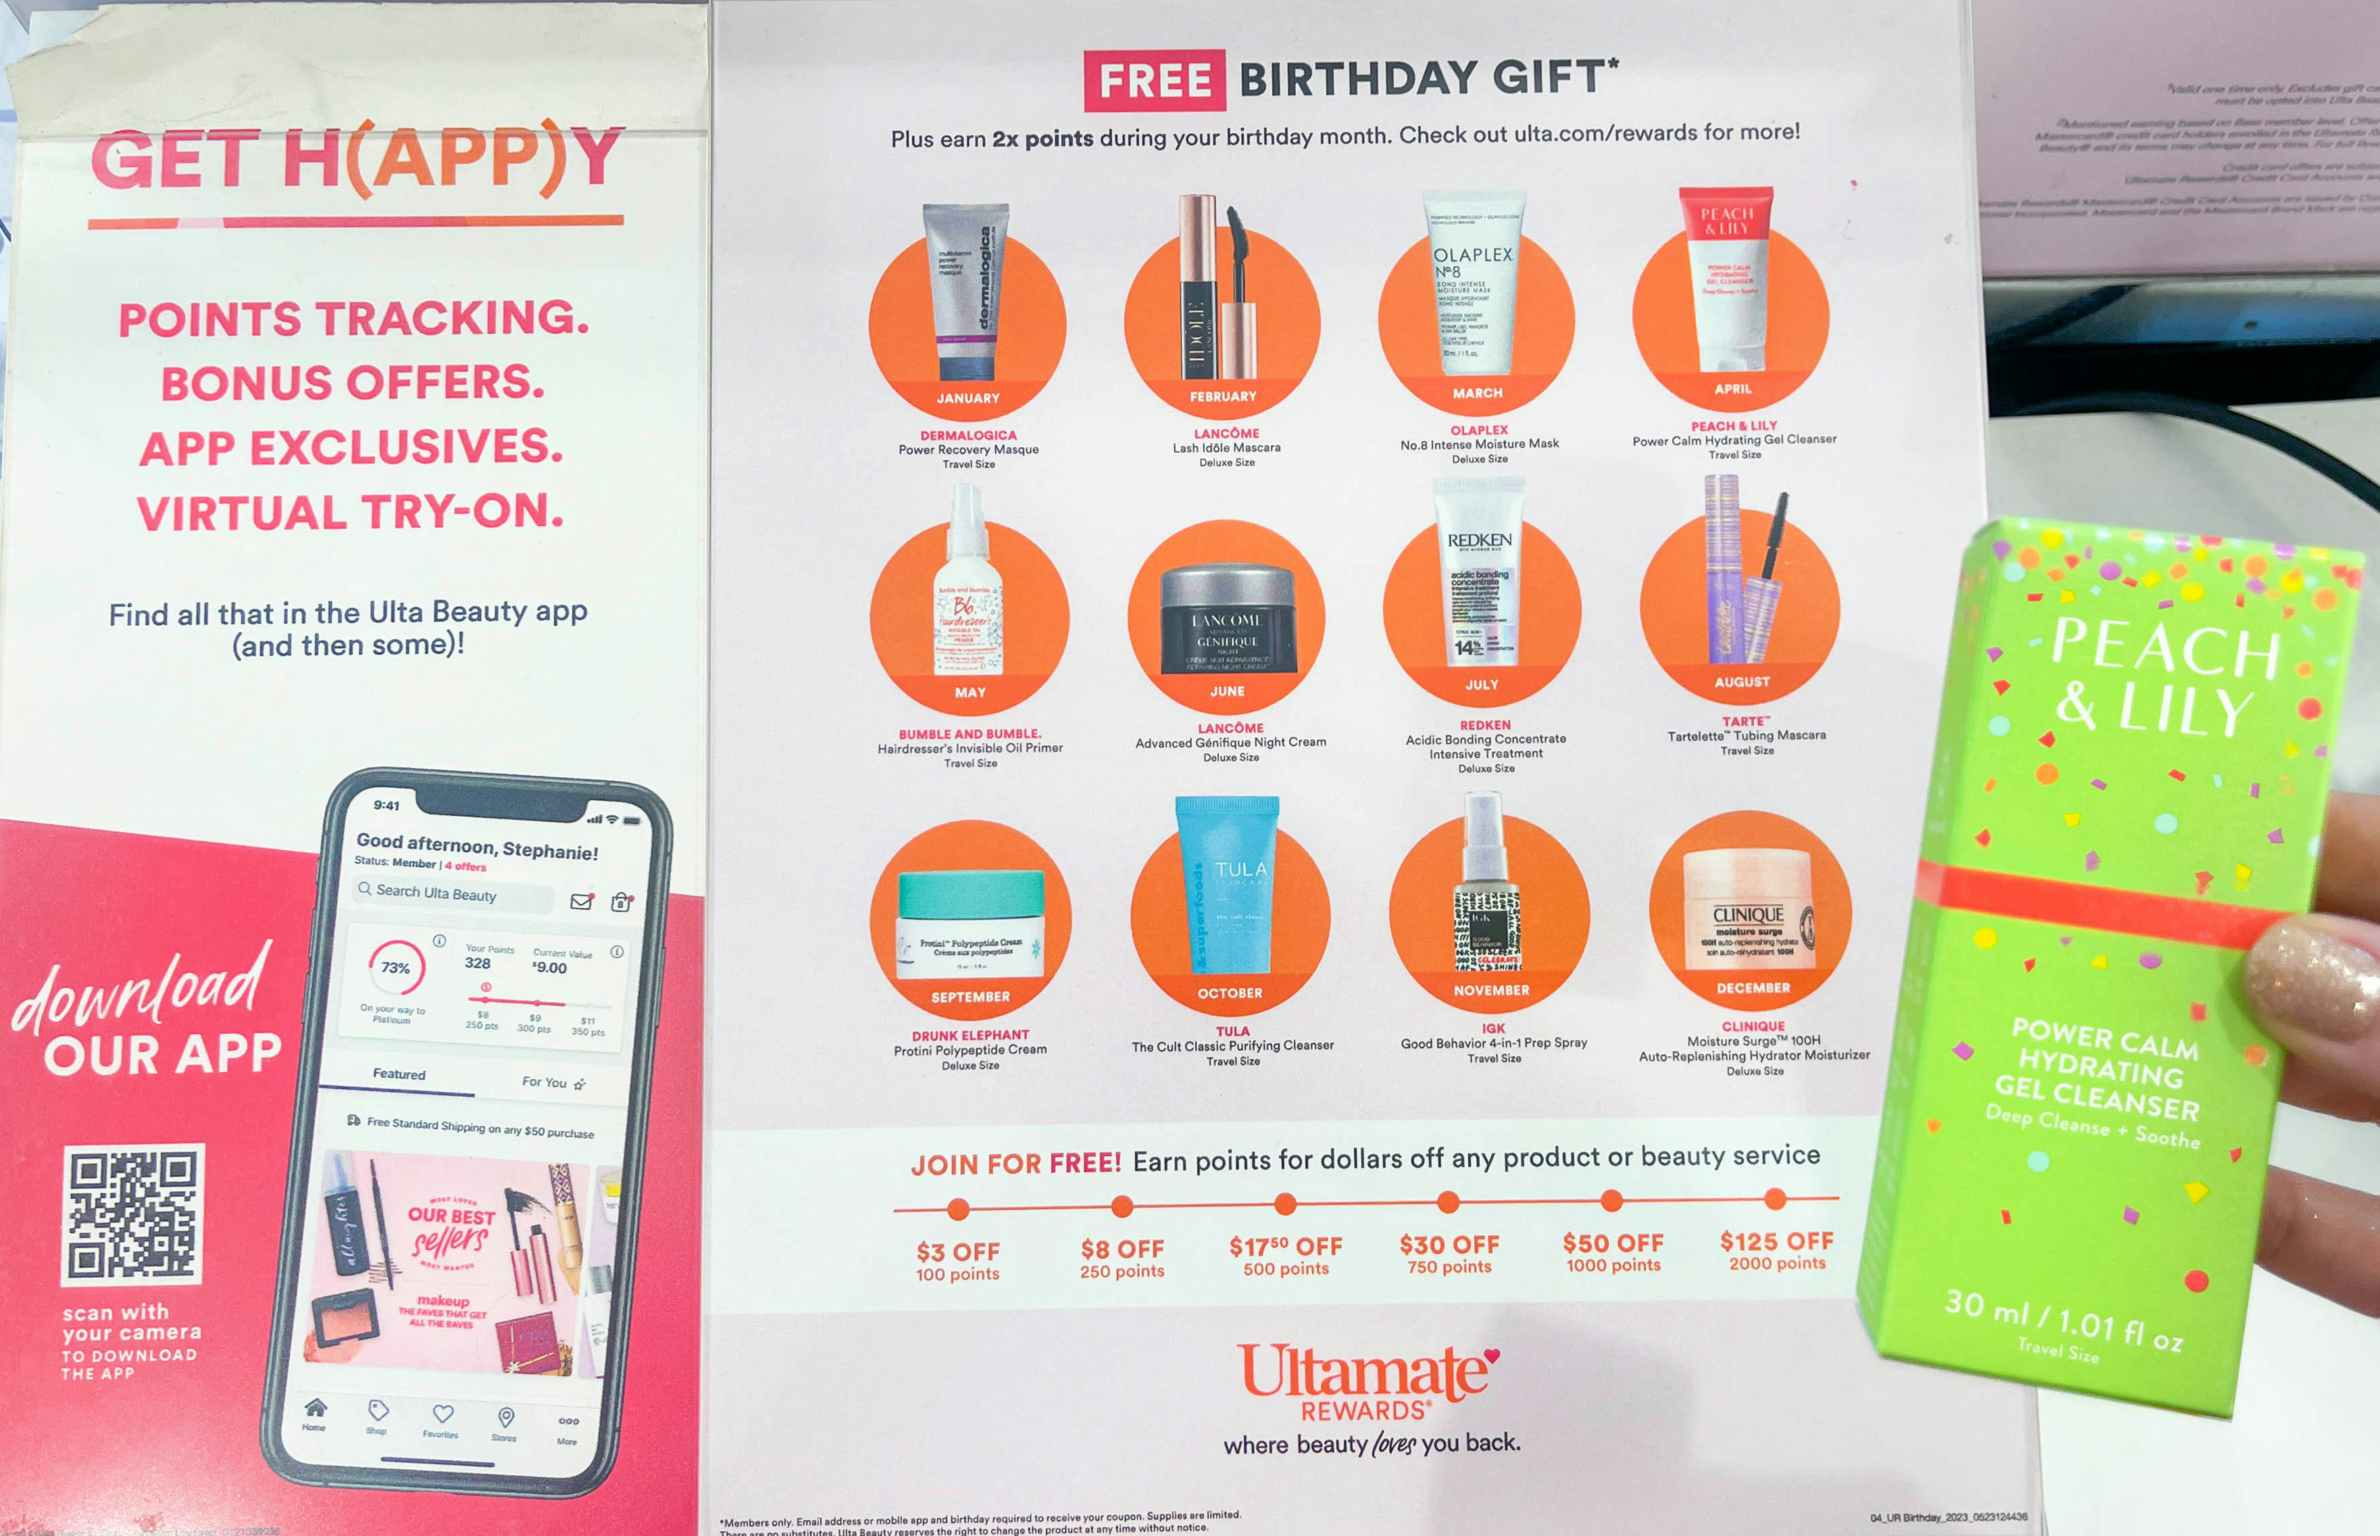 a person holding a birthday freebie in ulta in front of the store birthday sign